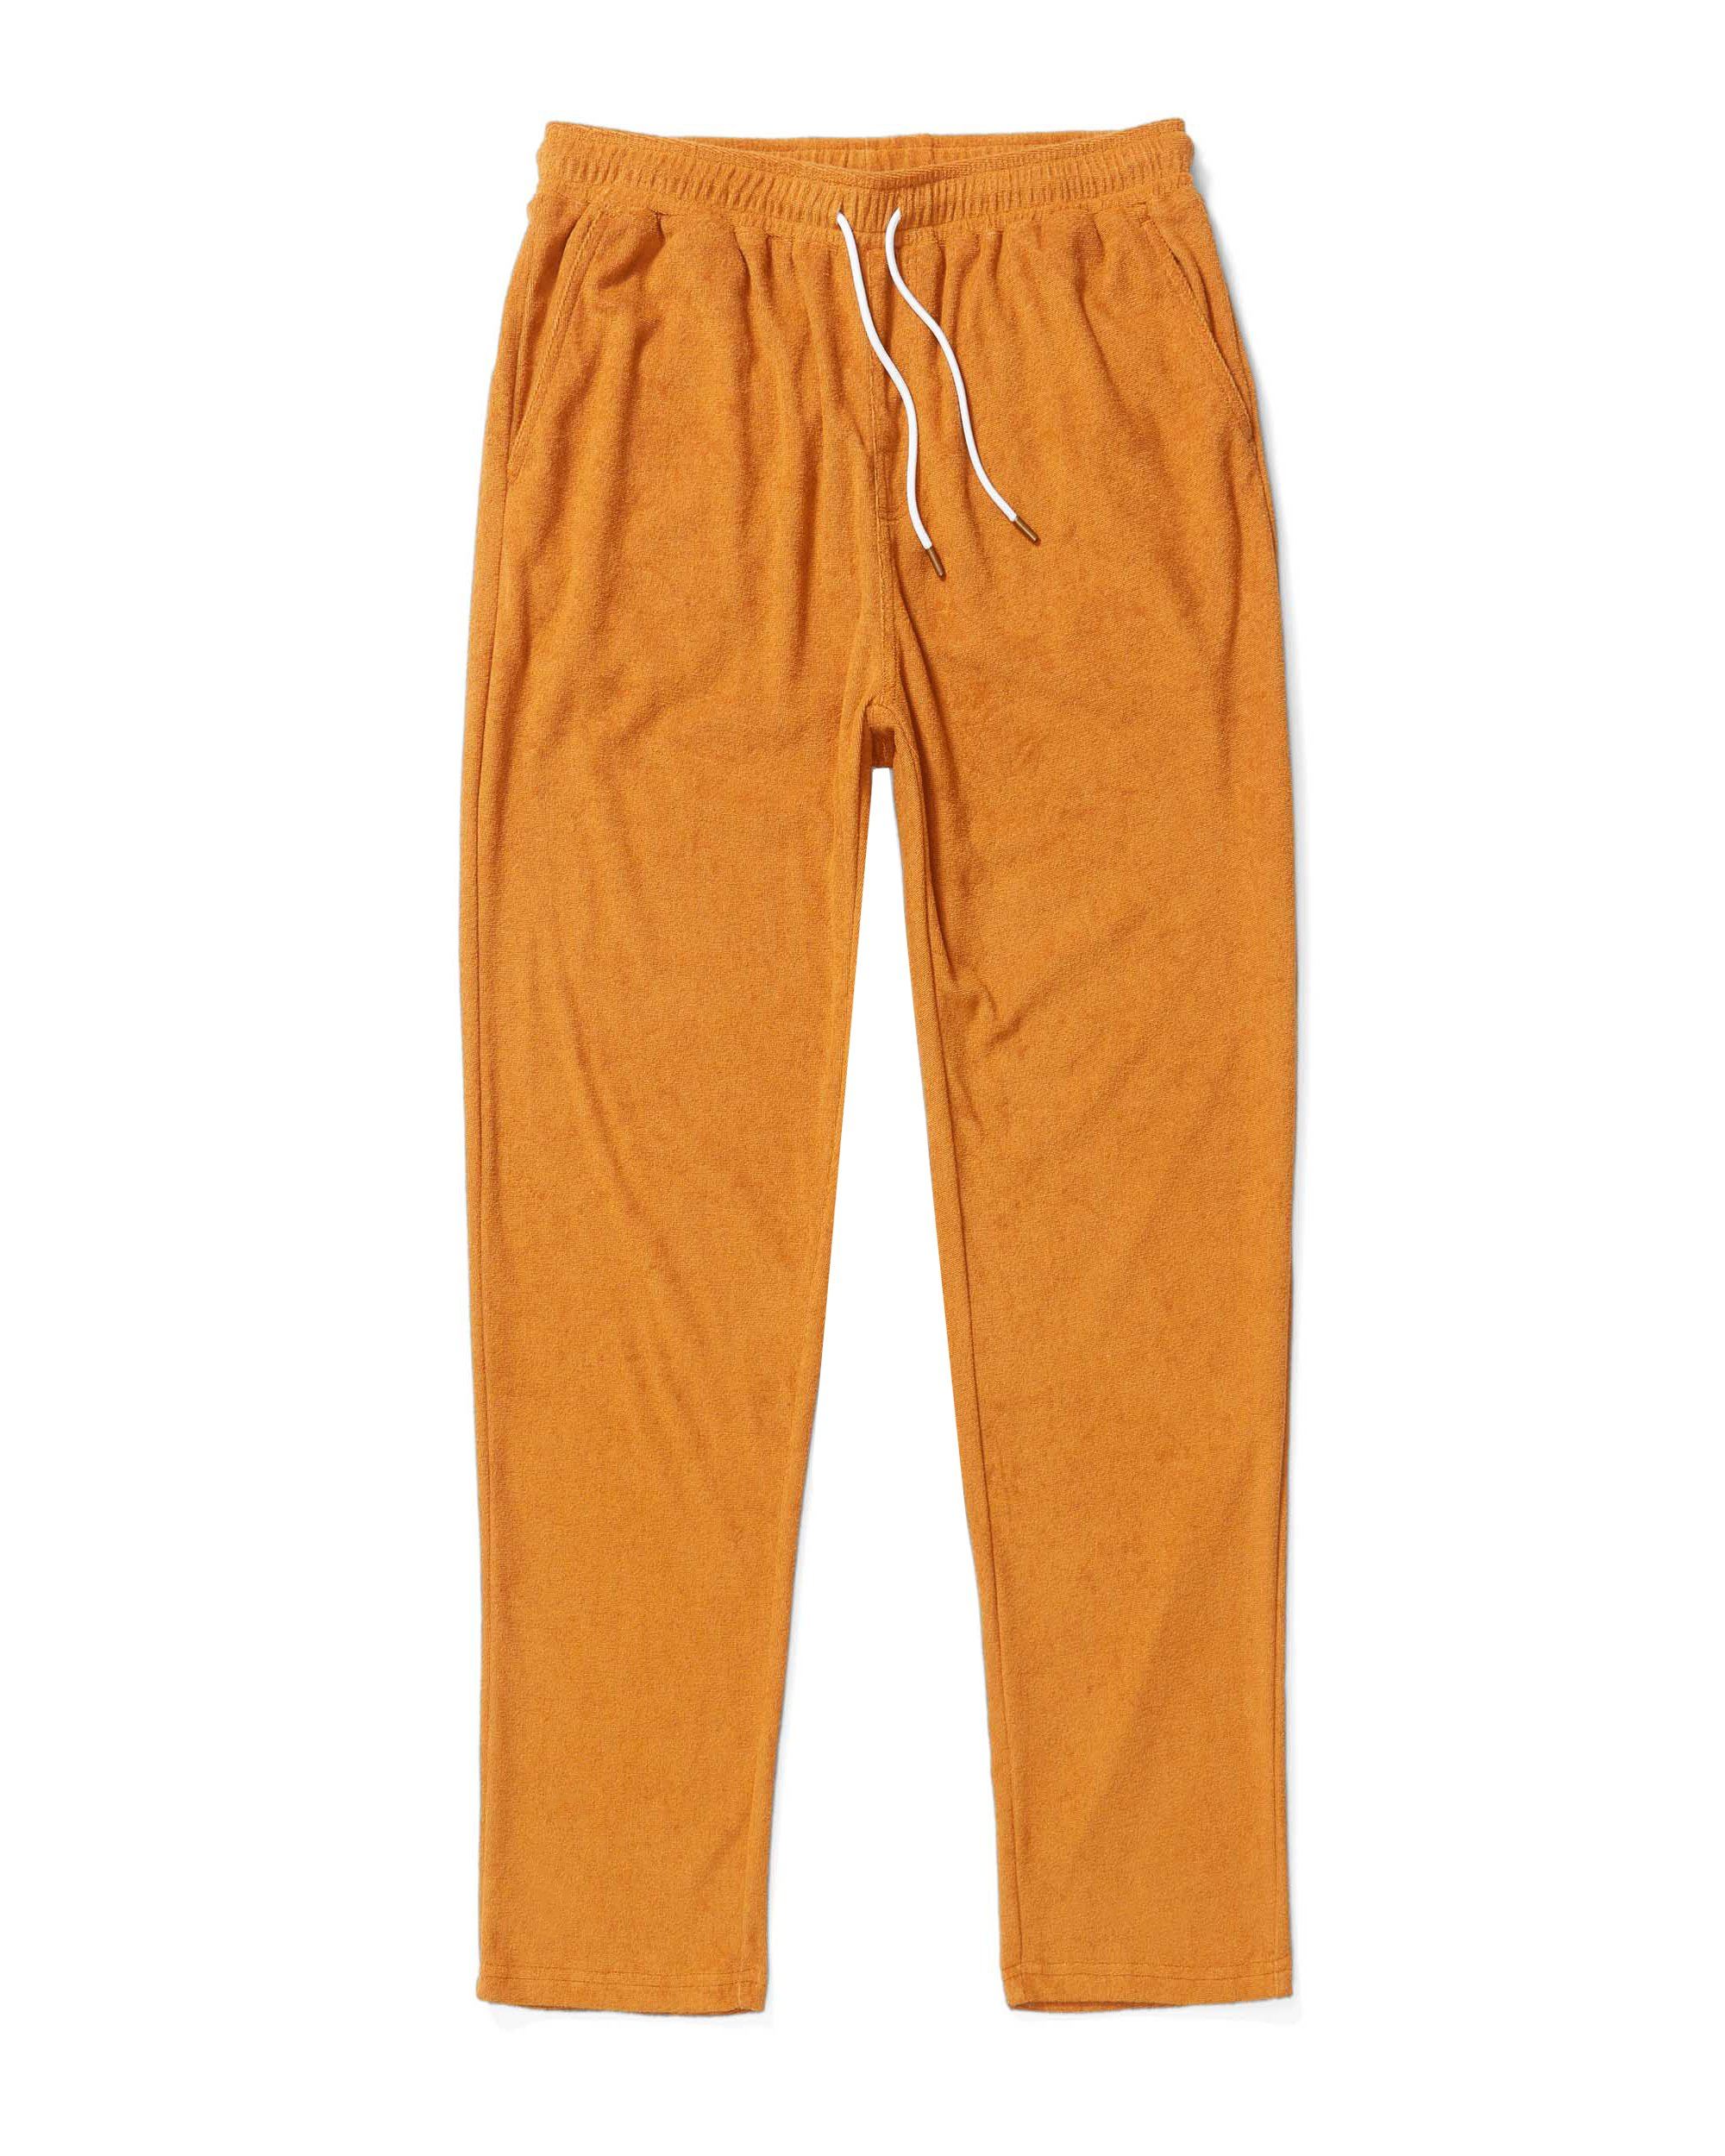 Image of The Tropez Terry Cloth Pants - Burnt Sienna